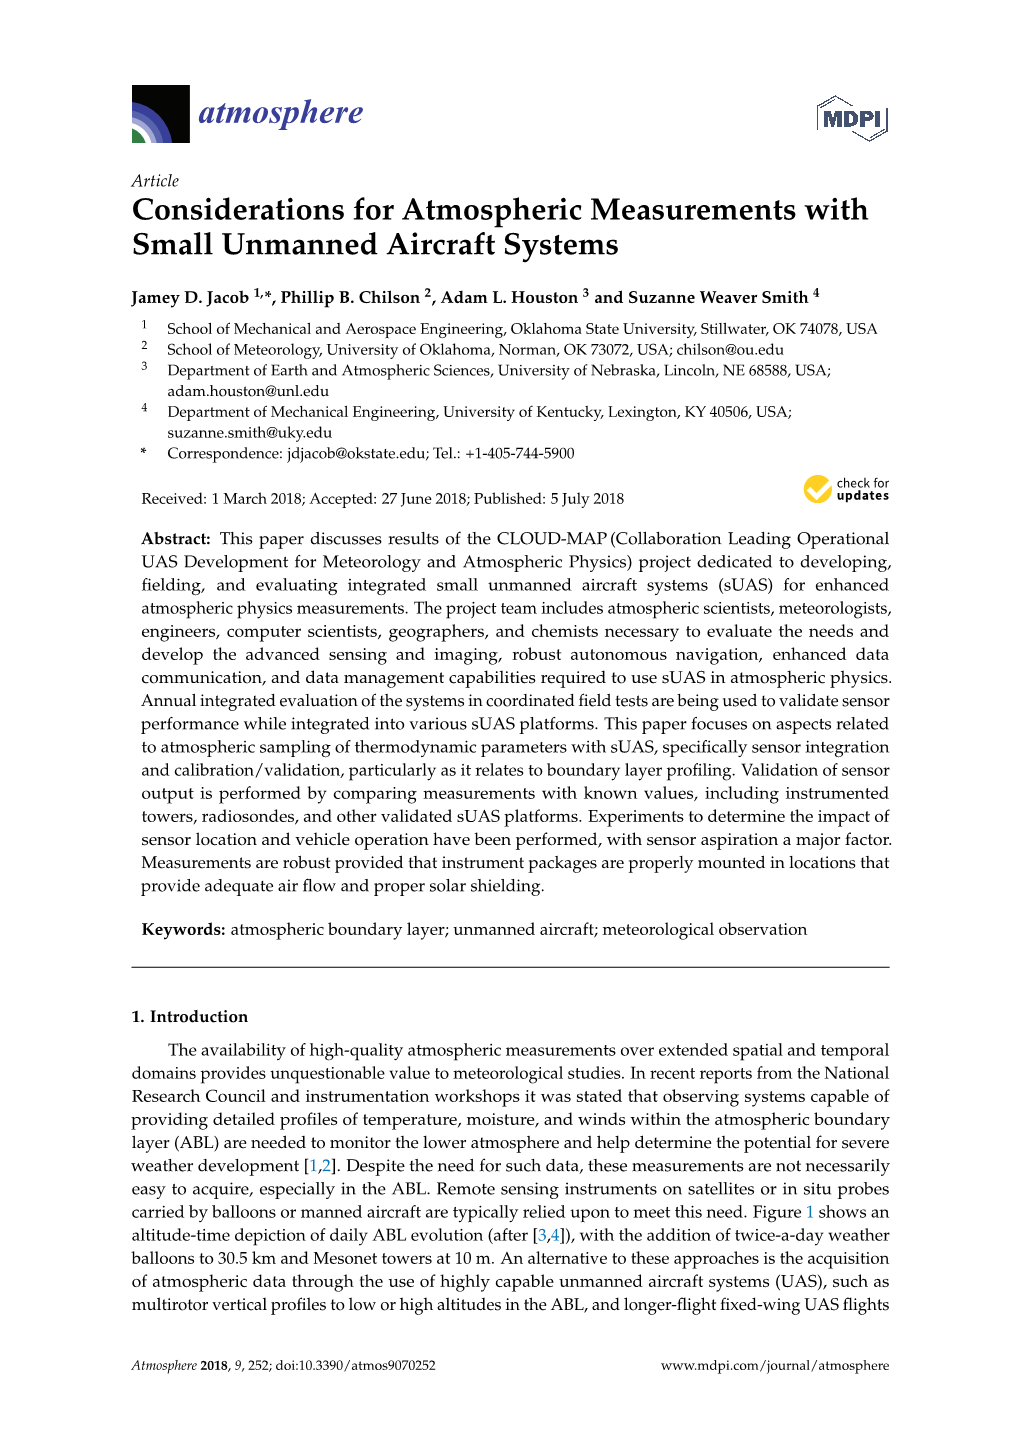 Considerations for Atmospheric Measurements with Small Unmanned Aircraft Systems